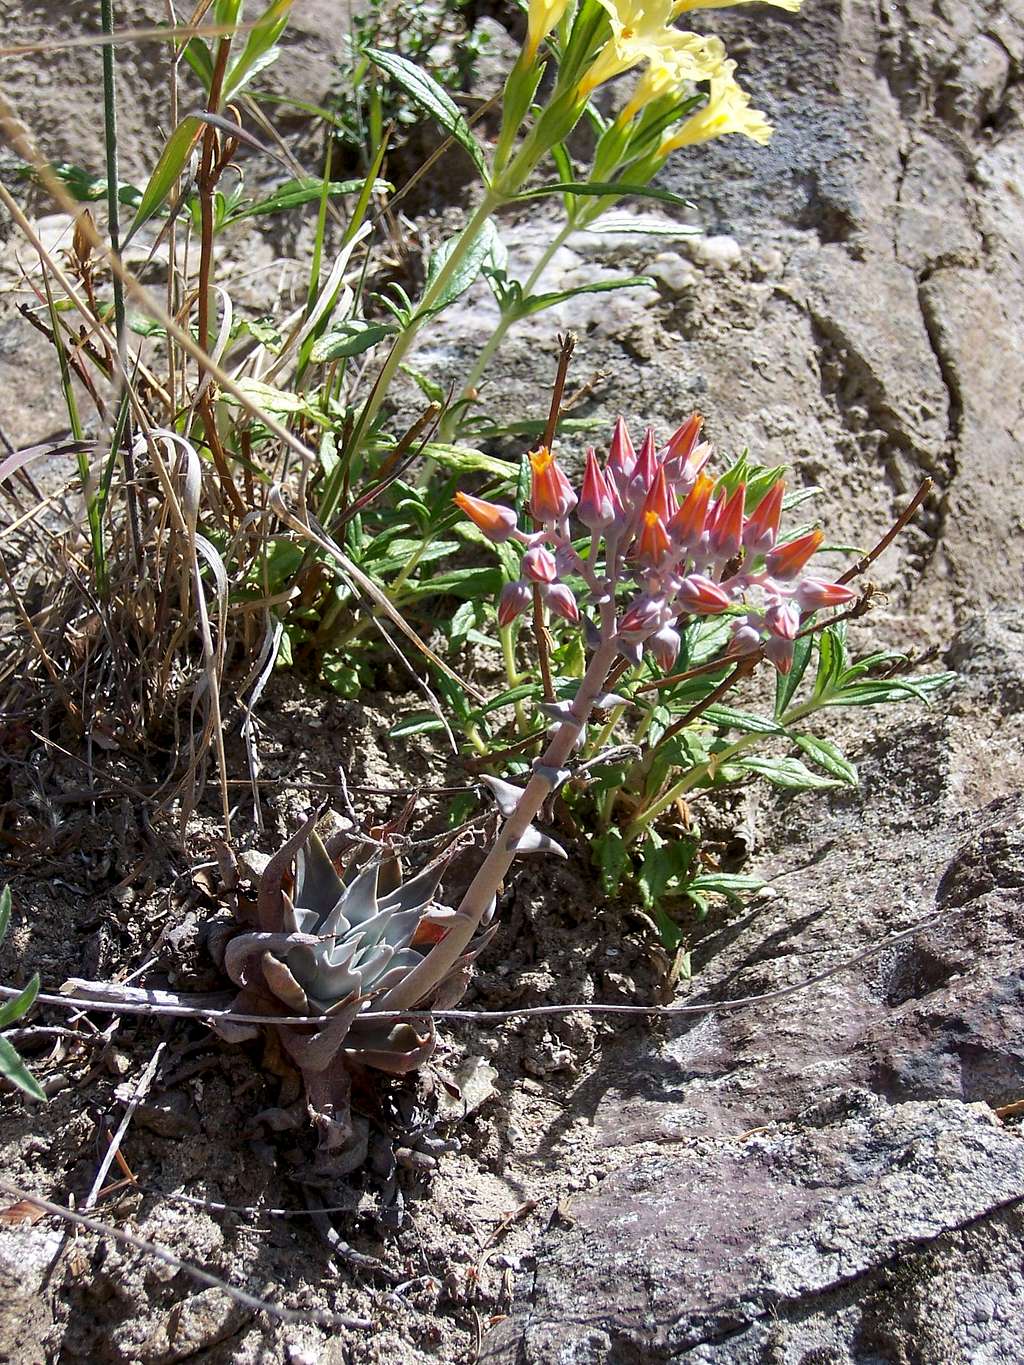 Dudleya and Mimulus